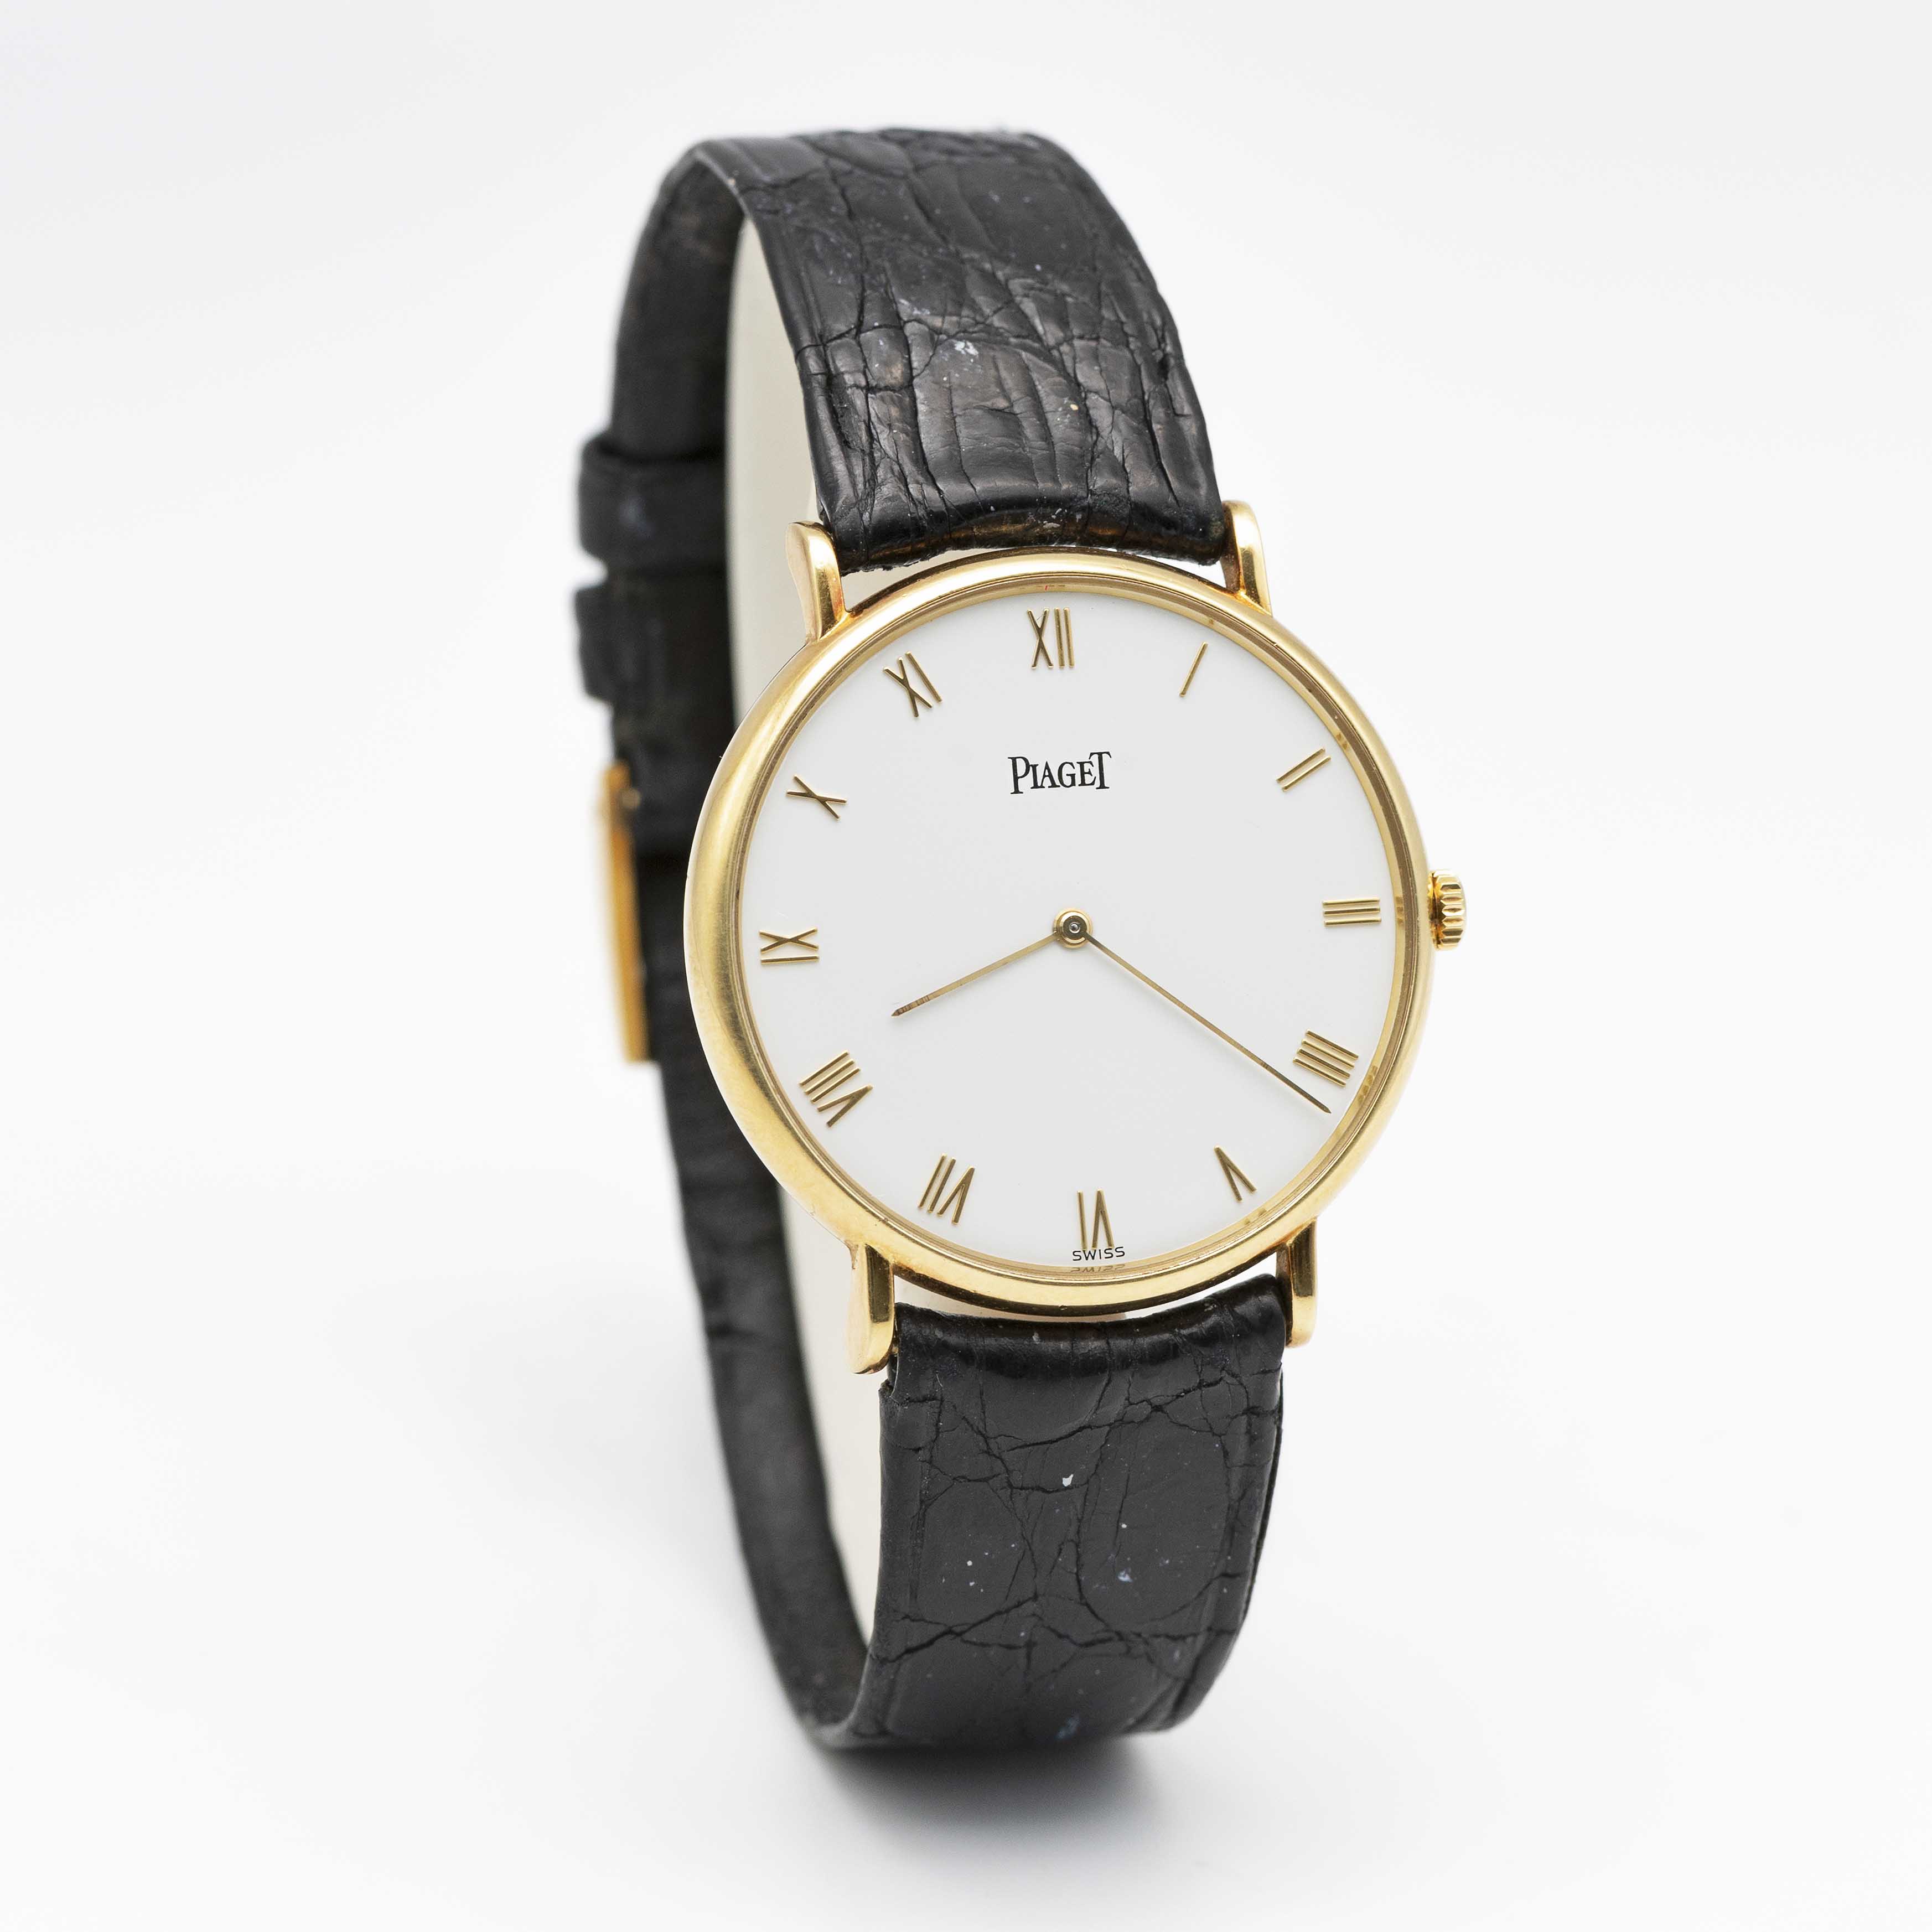 A GENTLEMAN'S SIZE 18K SOLID YELLOW GOLD PIAGET ALTIPLANO WRIST WATCH DATED 1992, REF. 9035 N WITH - Image 4 of 10